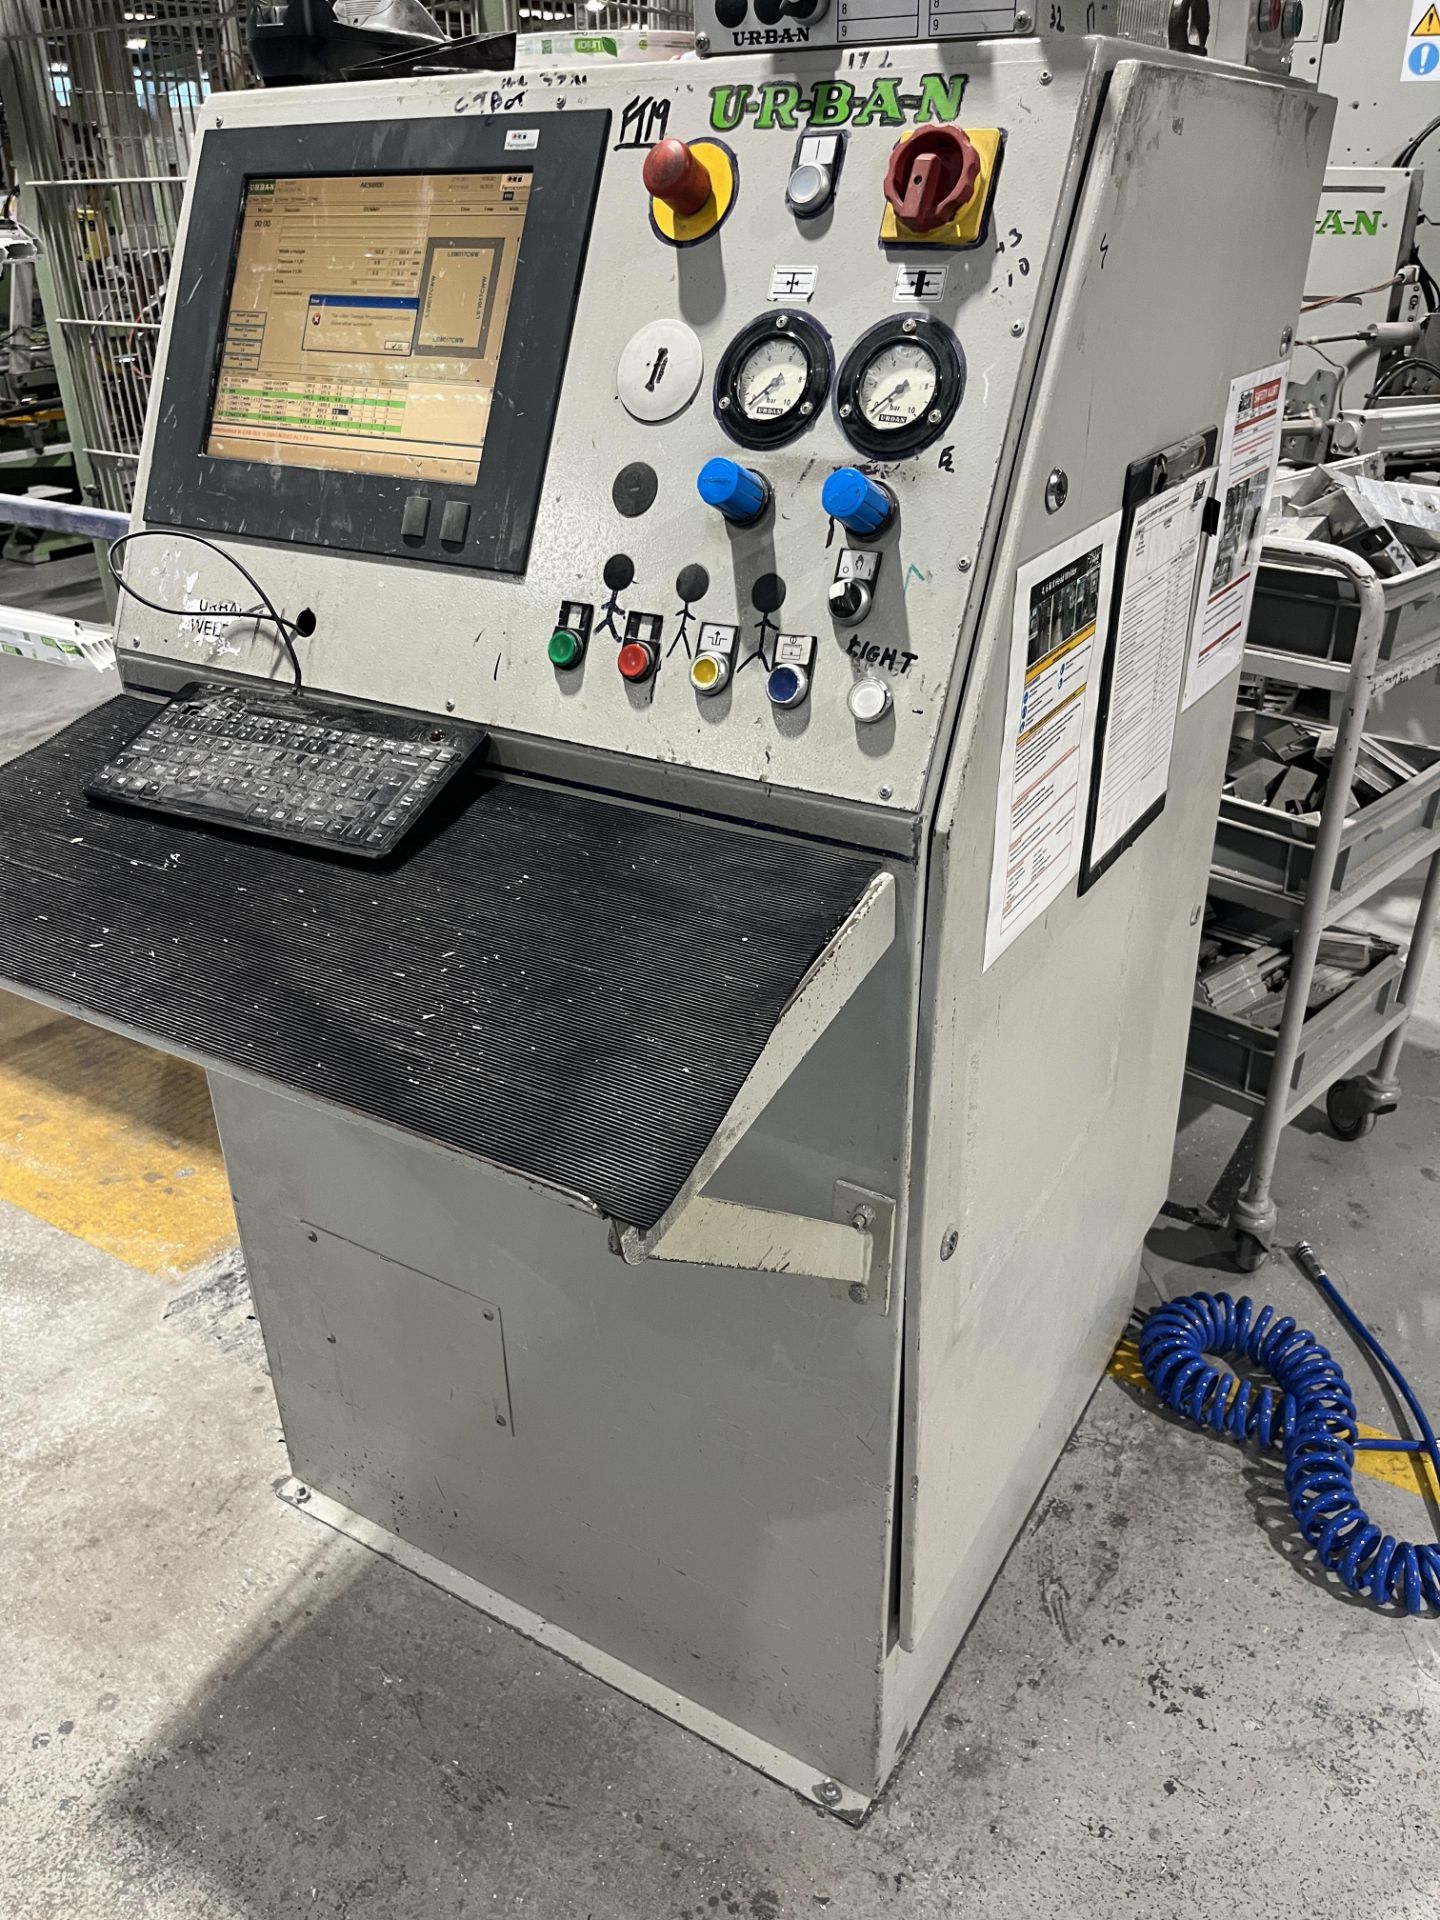 FT19 Urban AKS 6600 CNC 6 Head Automatic Horizontal Welder Serial No. 6600109 (2012) with Control Pa - Image 3 of 3